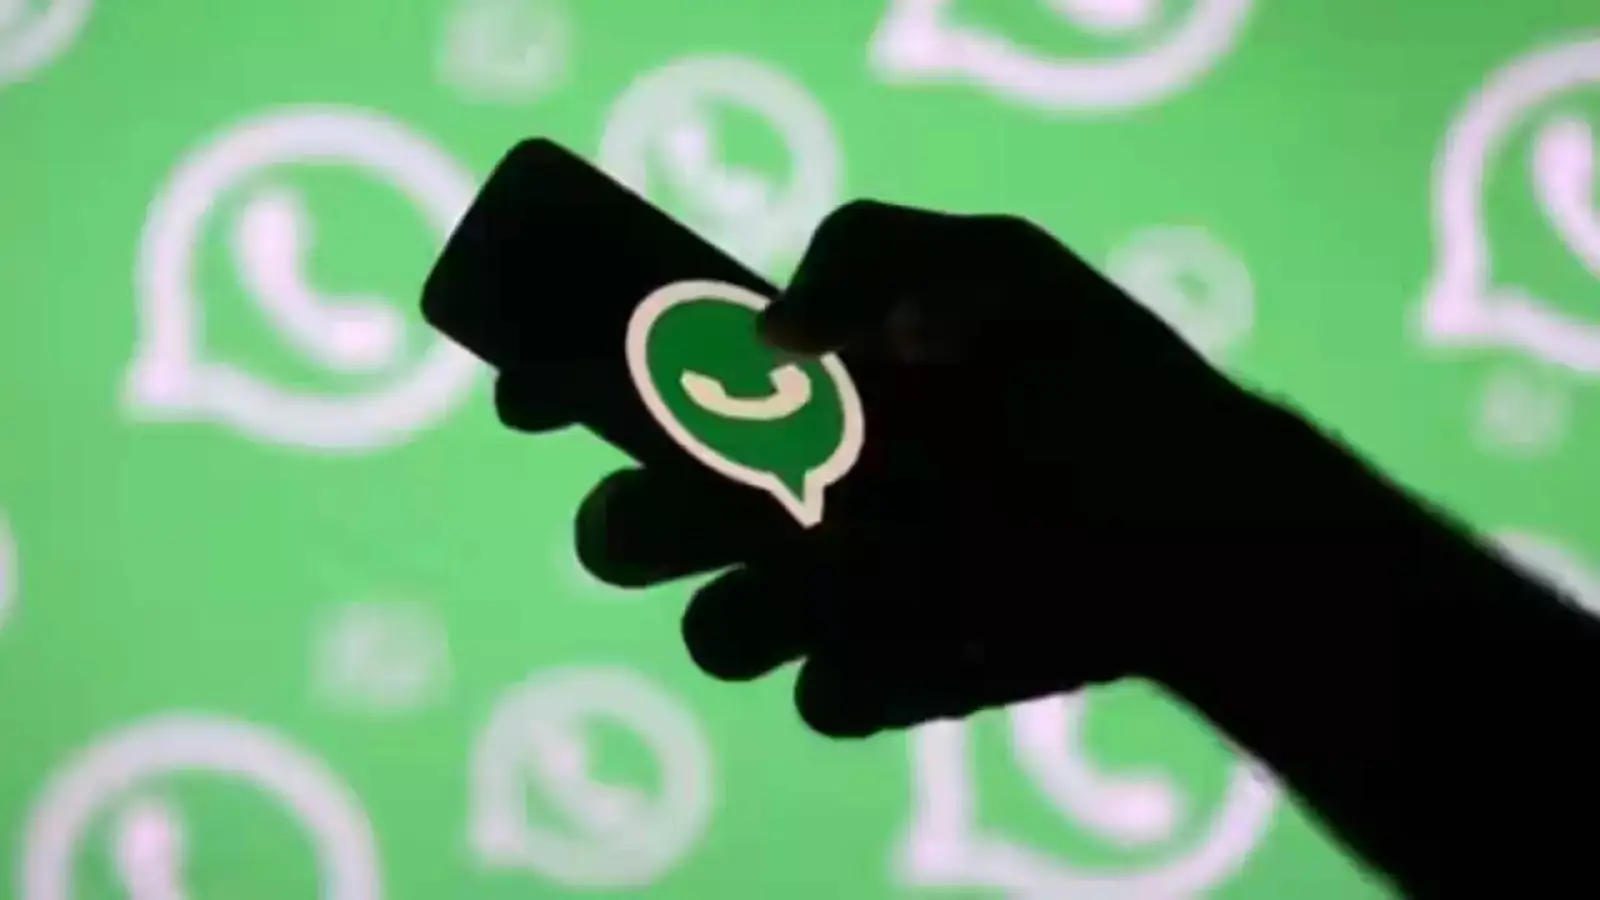 Now you will be able to share status from desktop as well, WhatsApp is working on this new feature